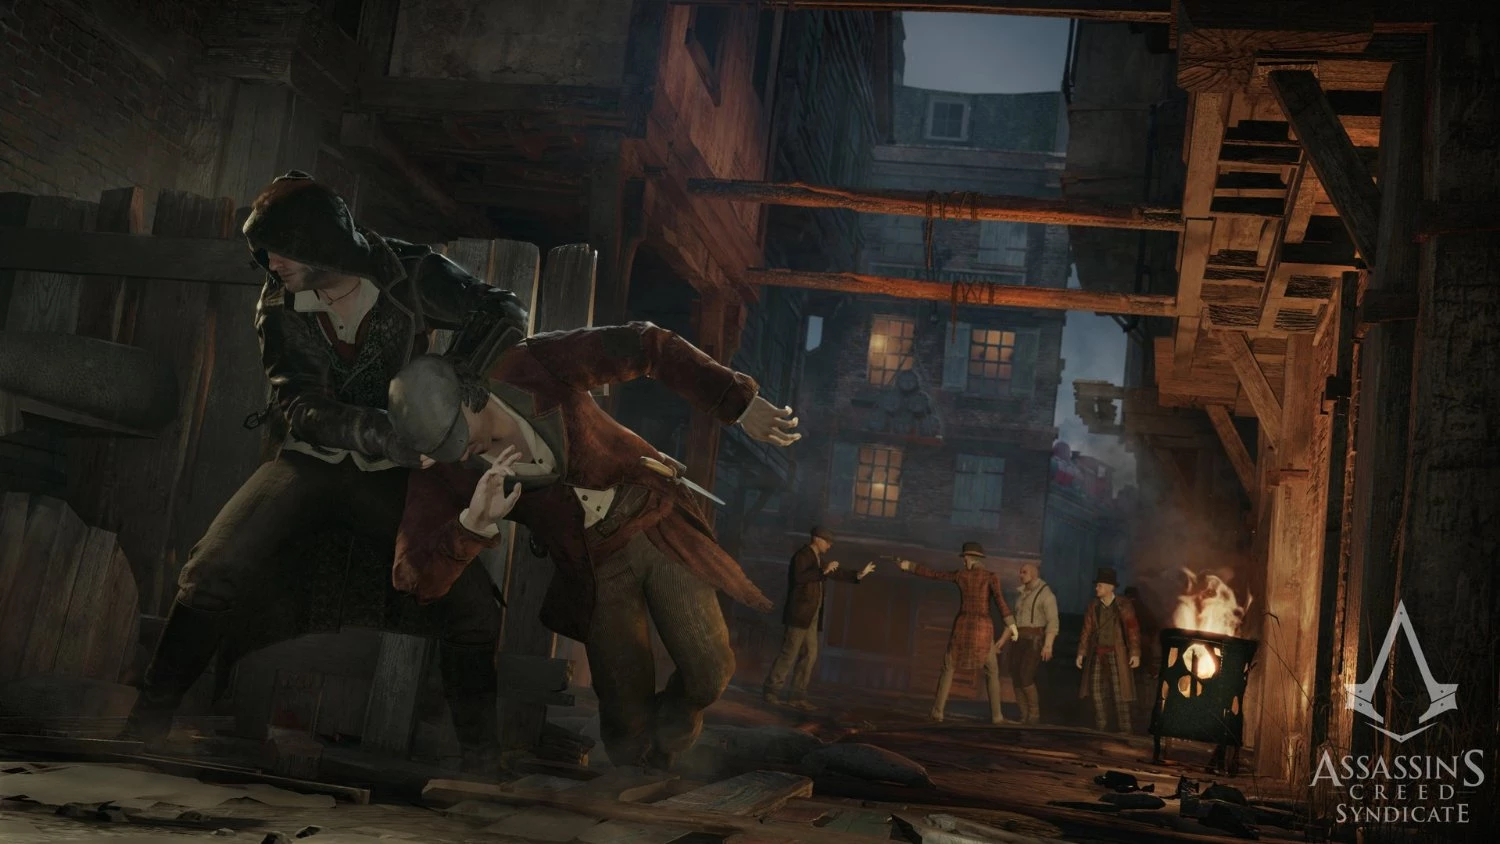 Assassin's Creed Syndicate (Special Edition) voor de PlayStation 4 kopen op nedgame.nl